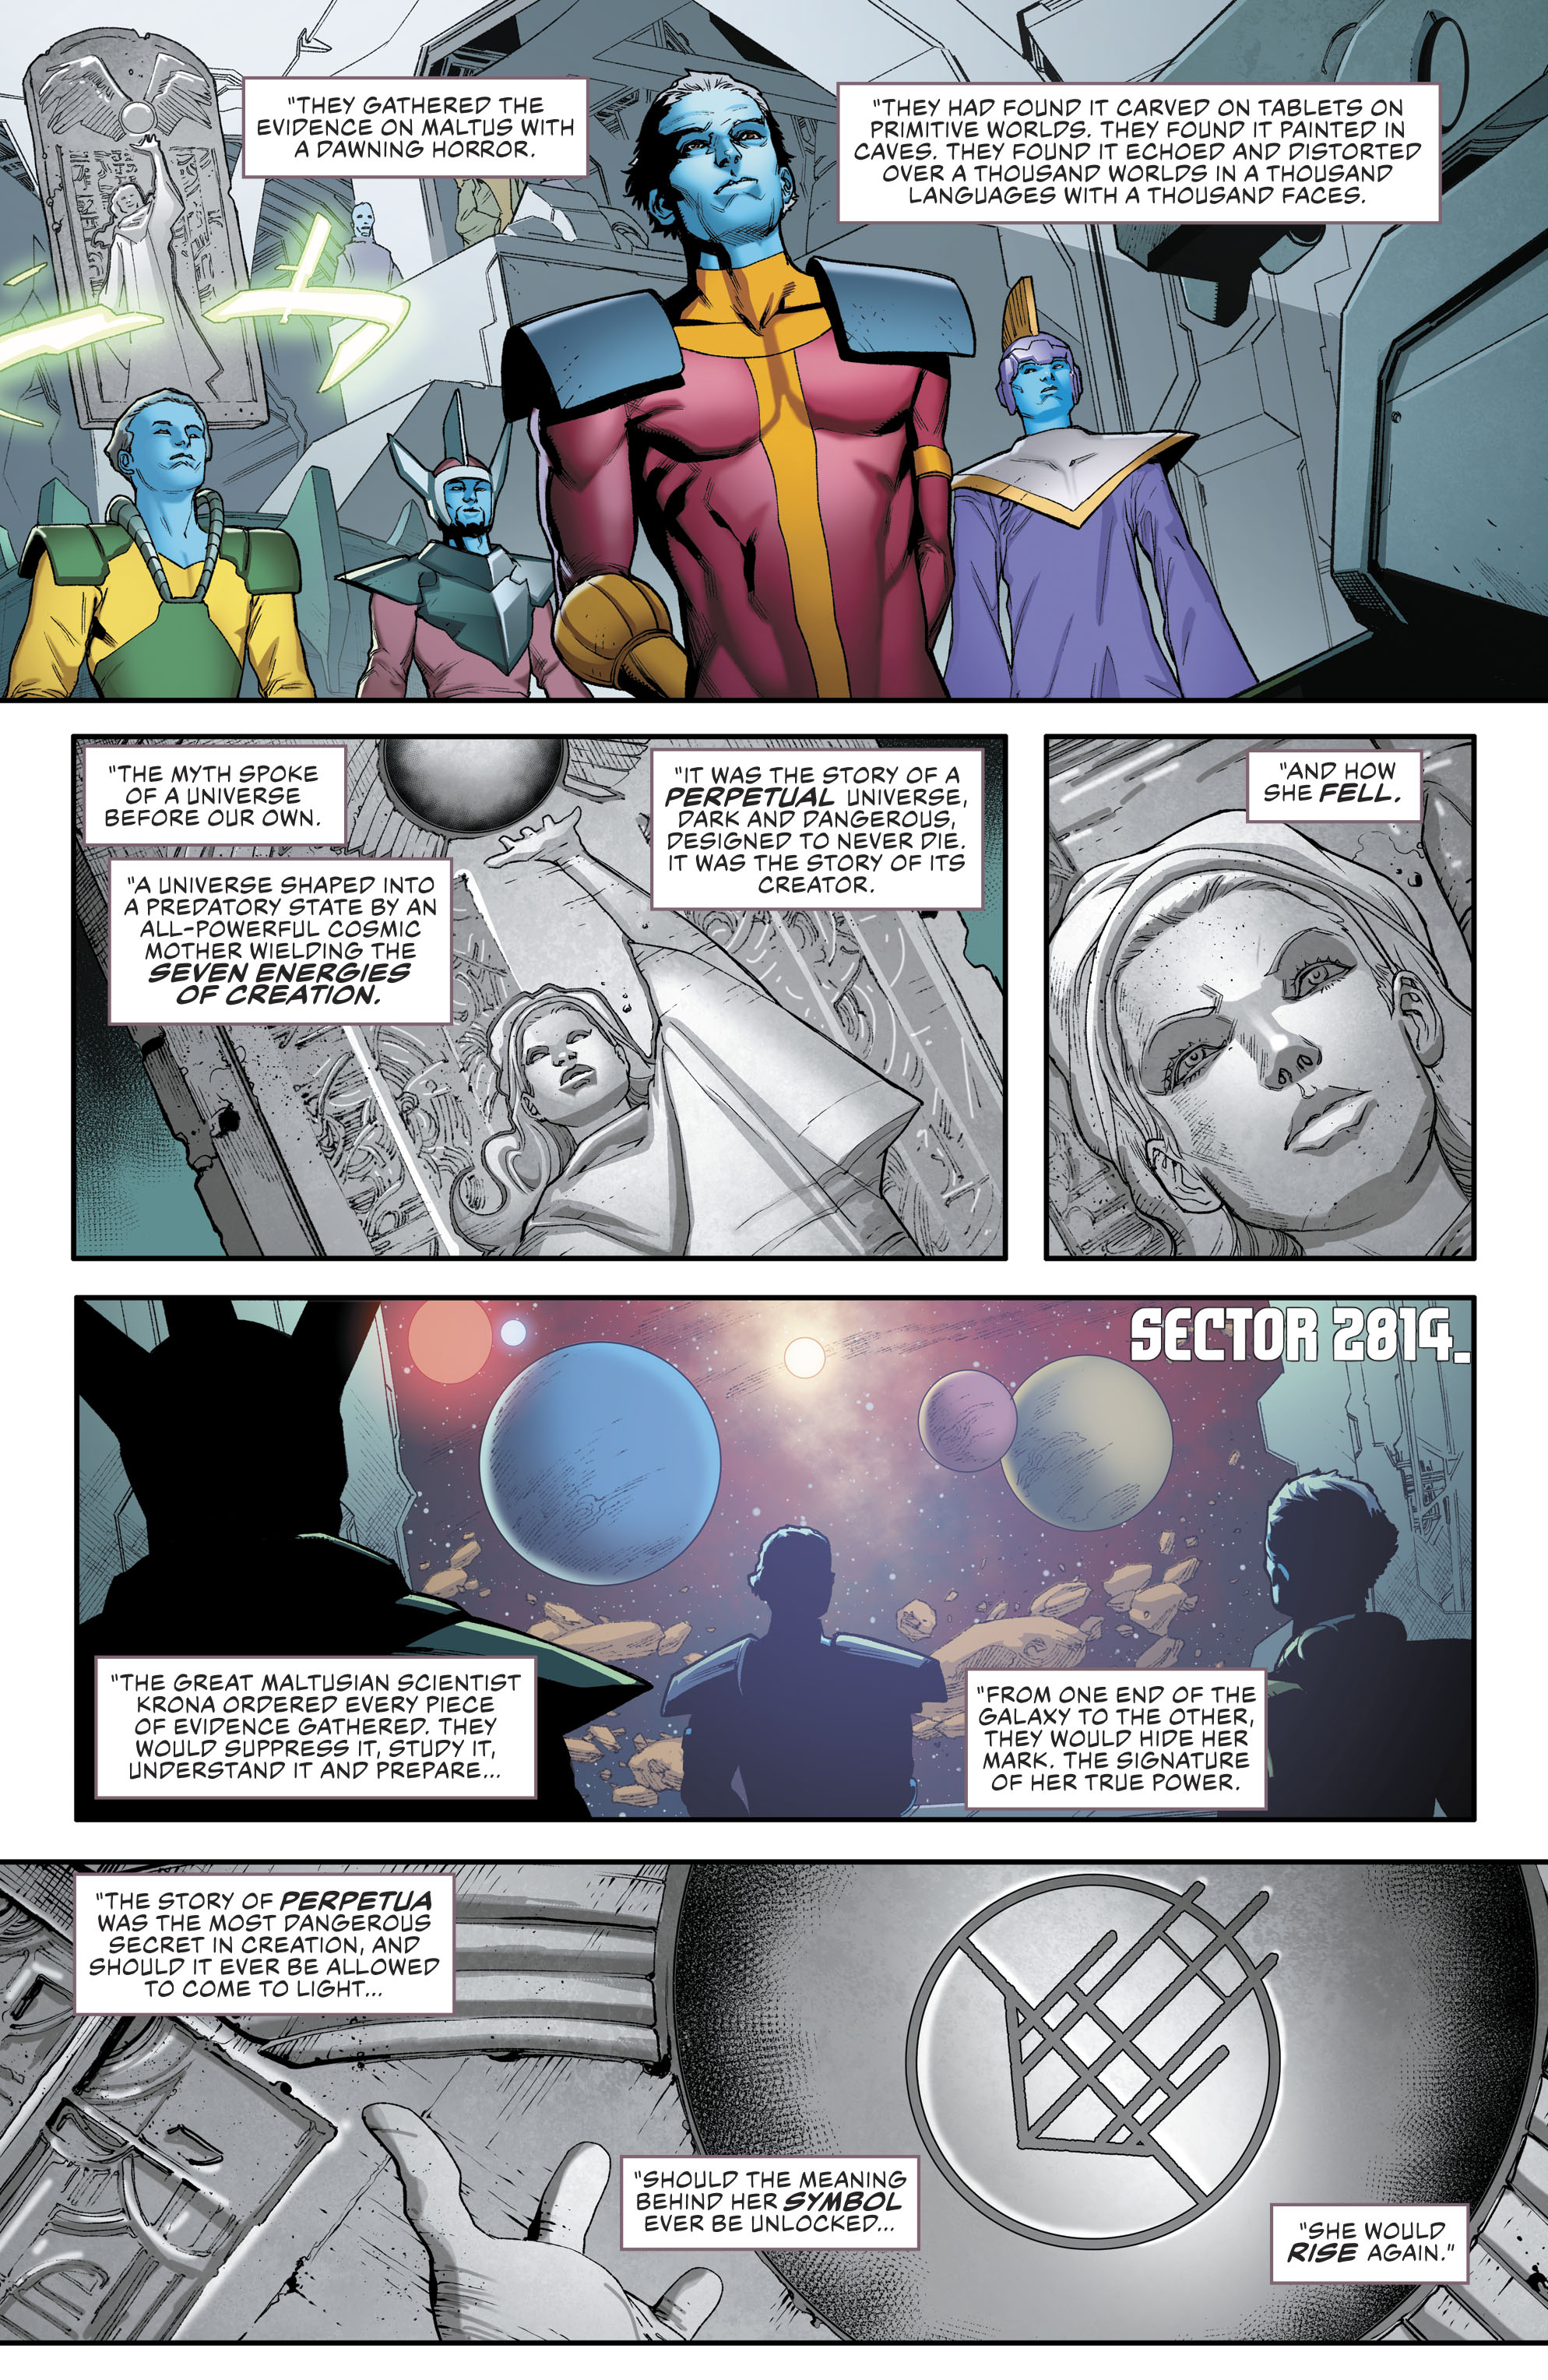 Justice League (2018-): Chapter 16 - Page 4